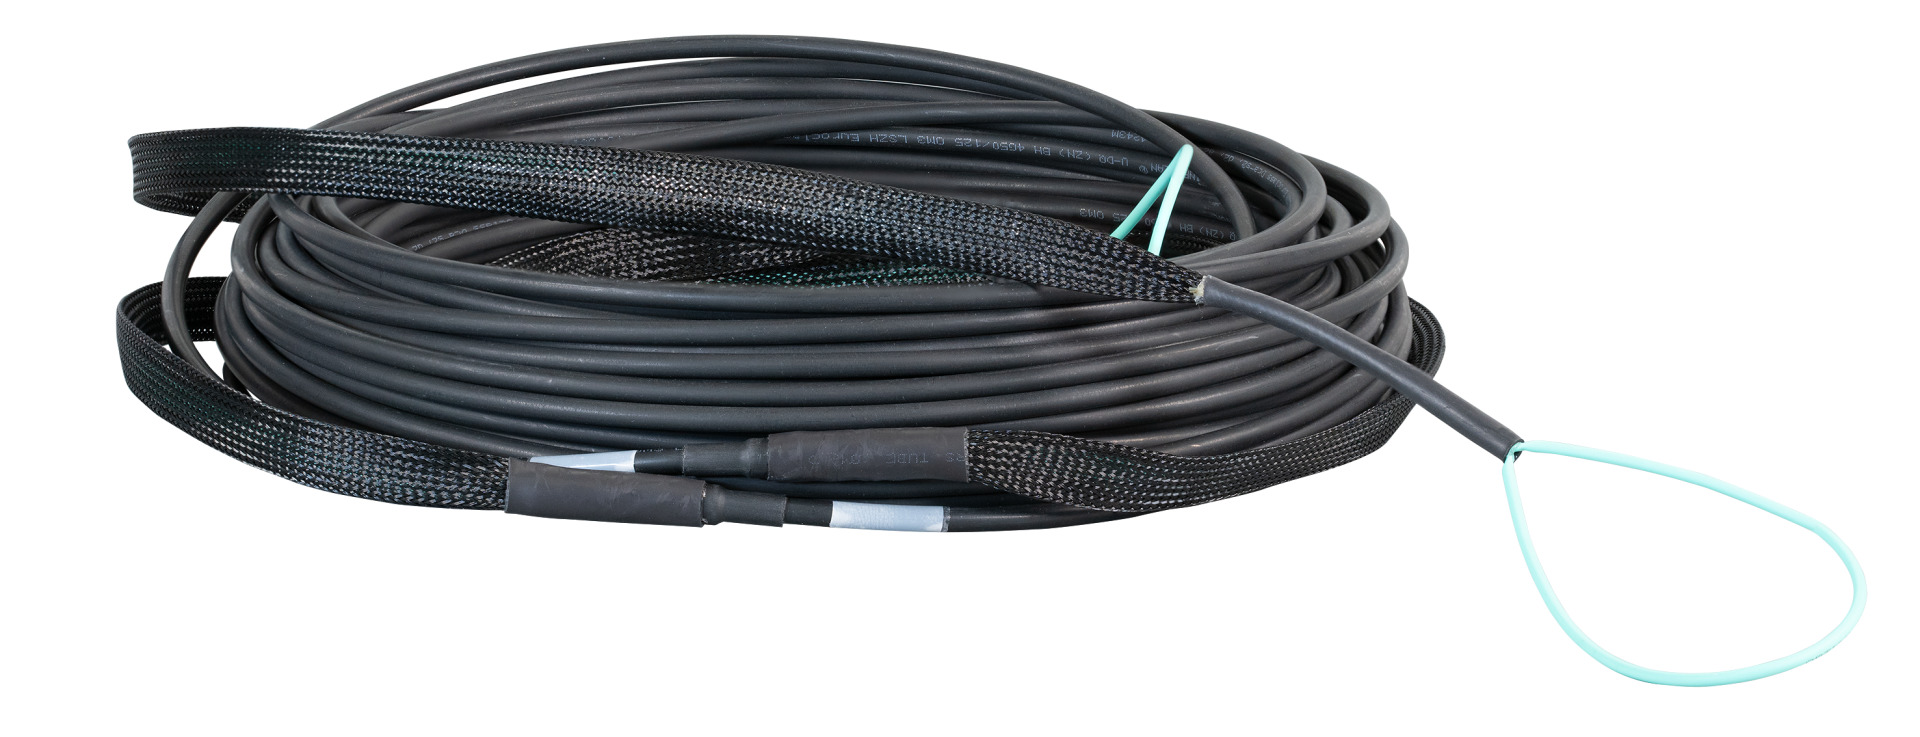 Trunk cable U-DQ(ZN)BH 8G 50/125, LC/LC OM3 190m